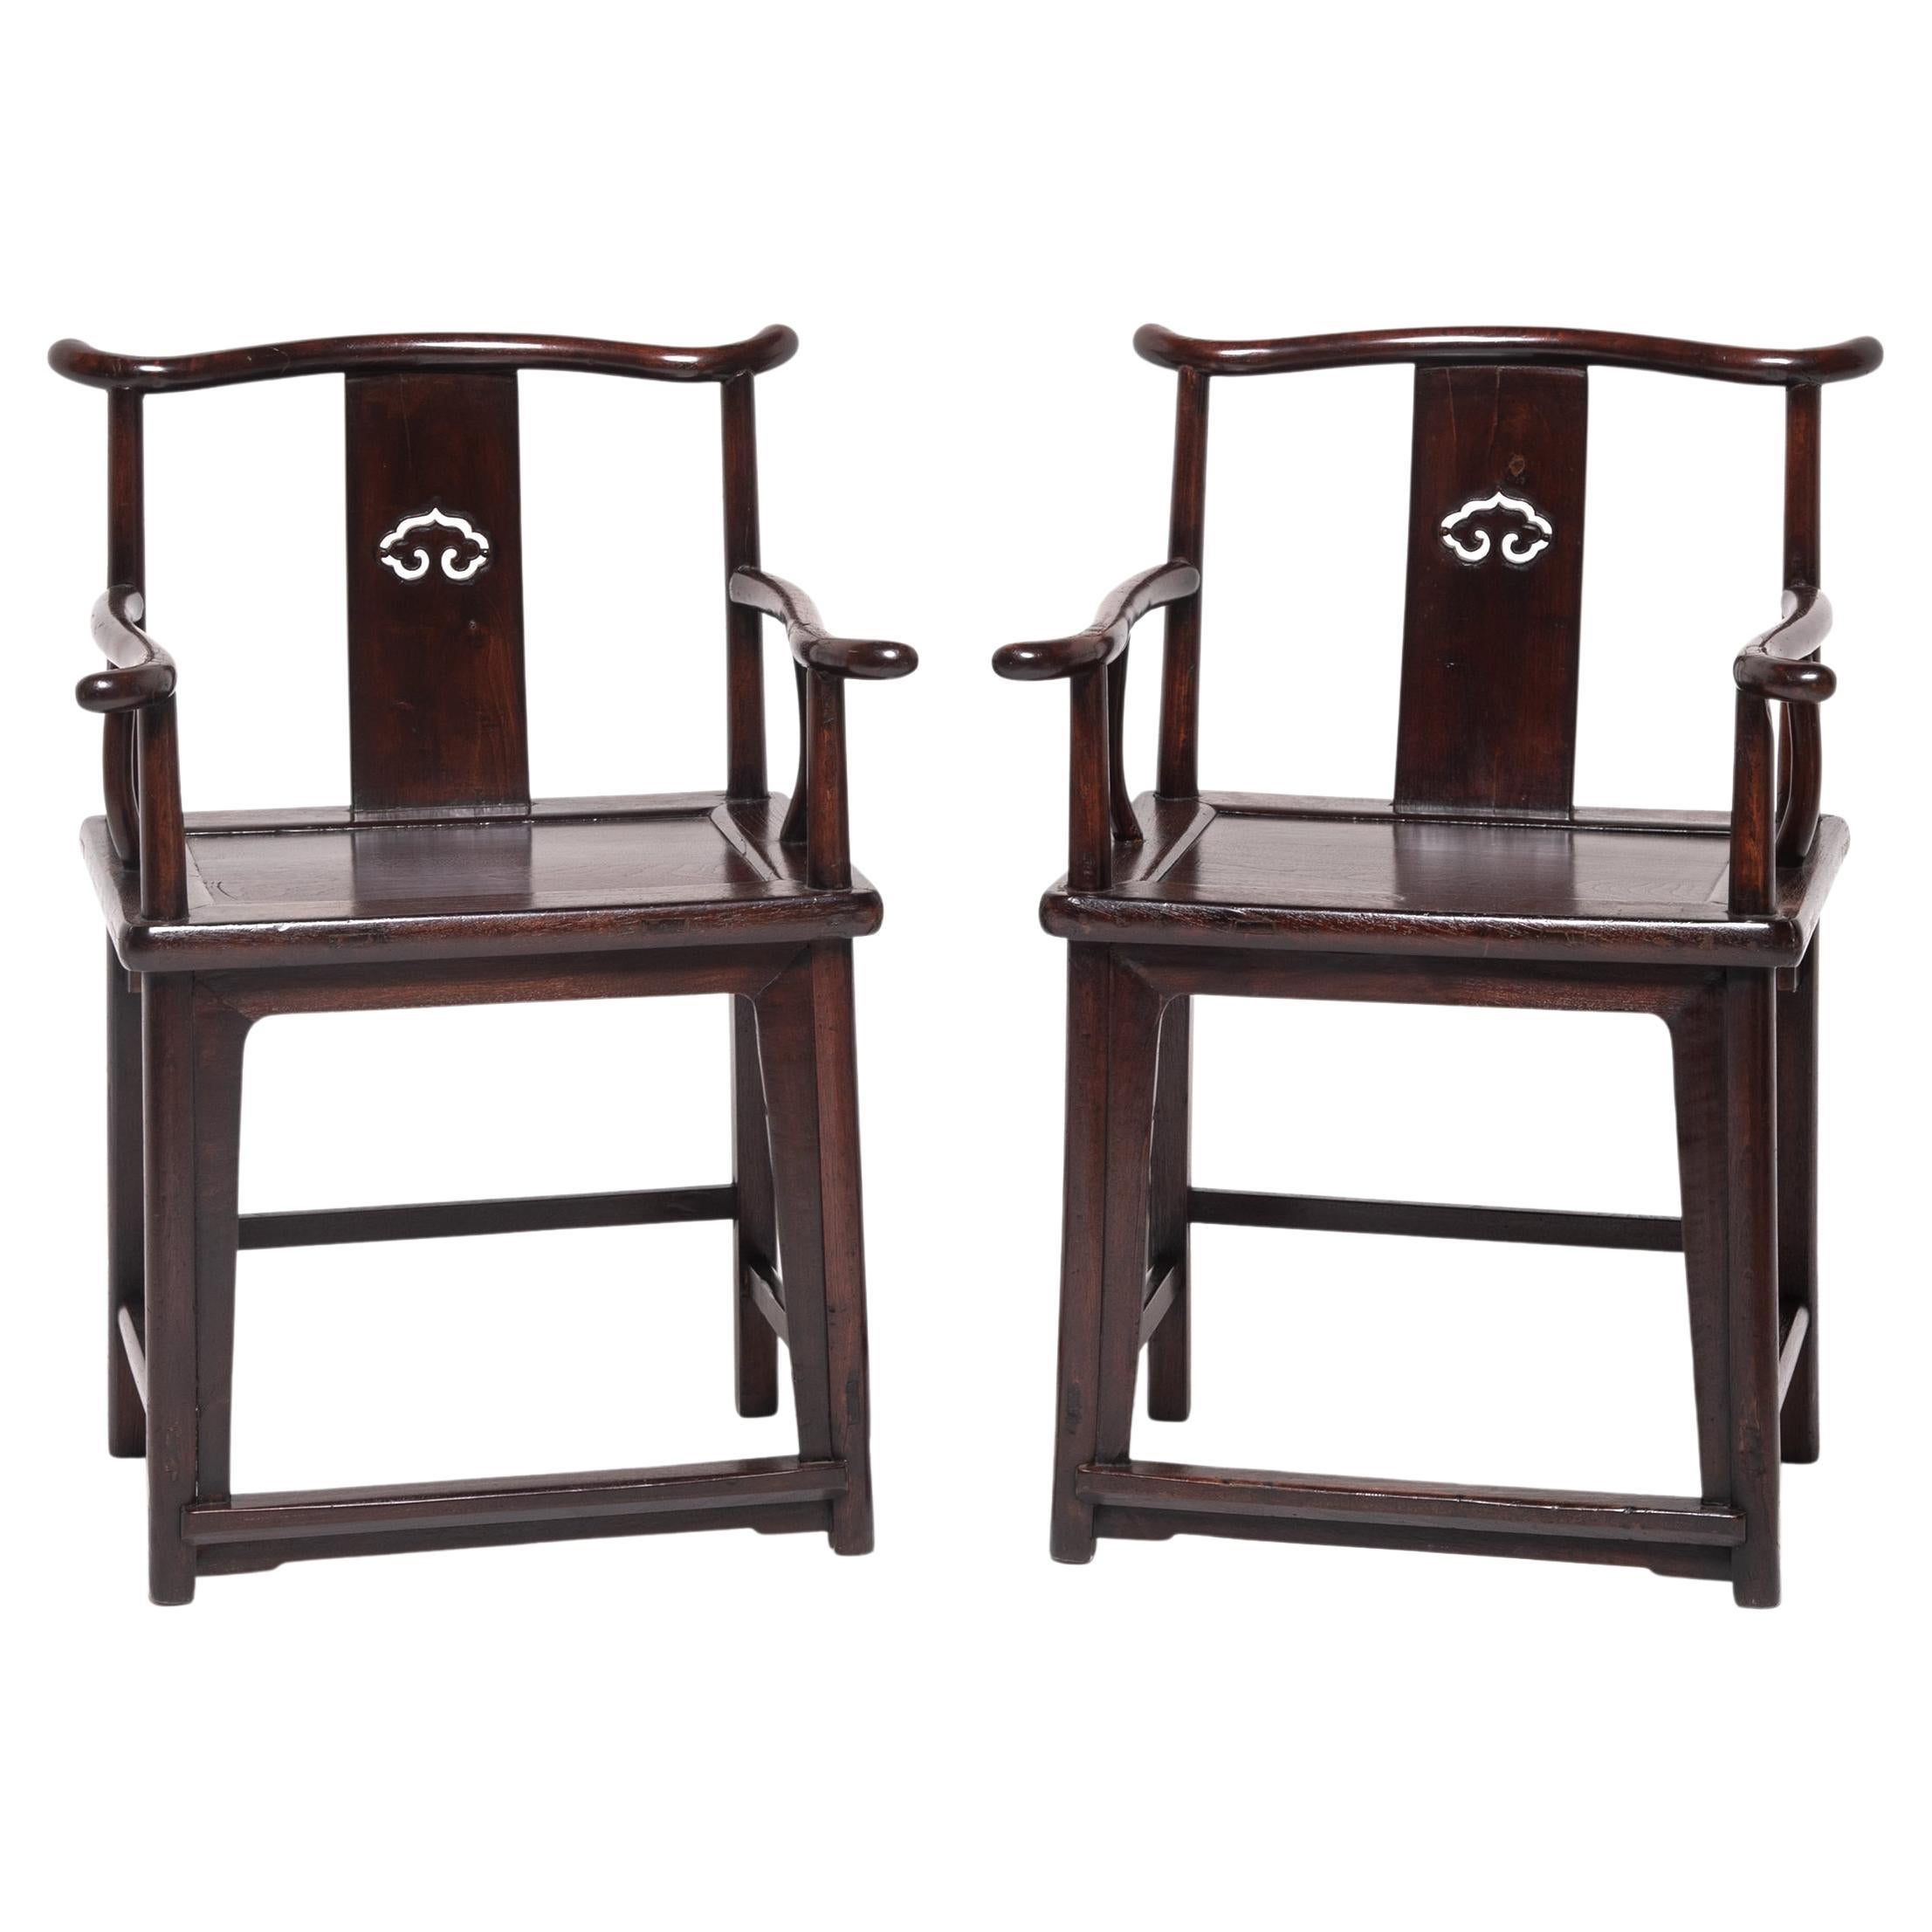 Pair of Chinese Low Back Official's Chairs, C. 1850